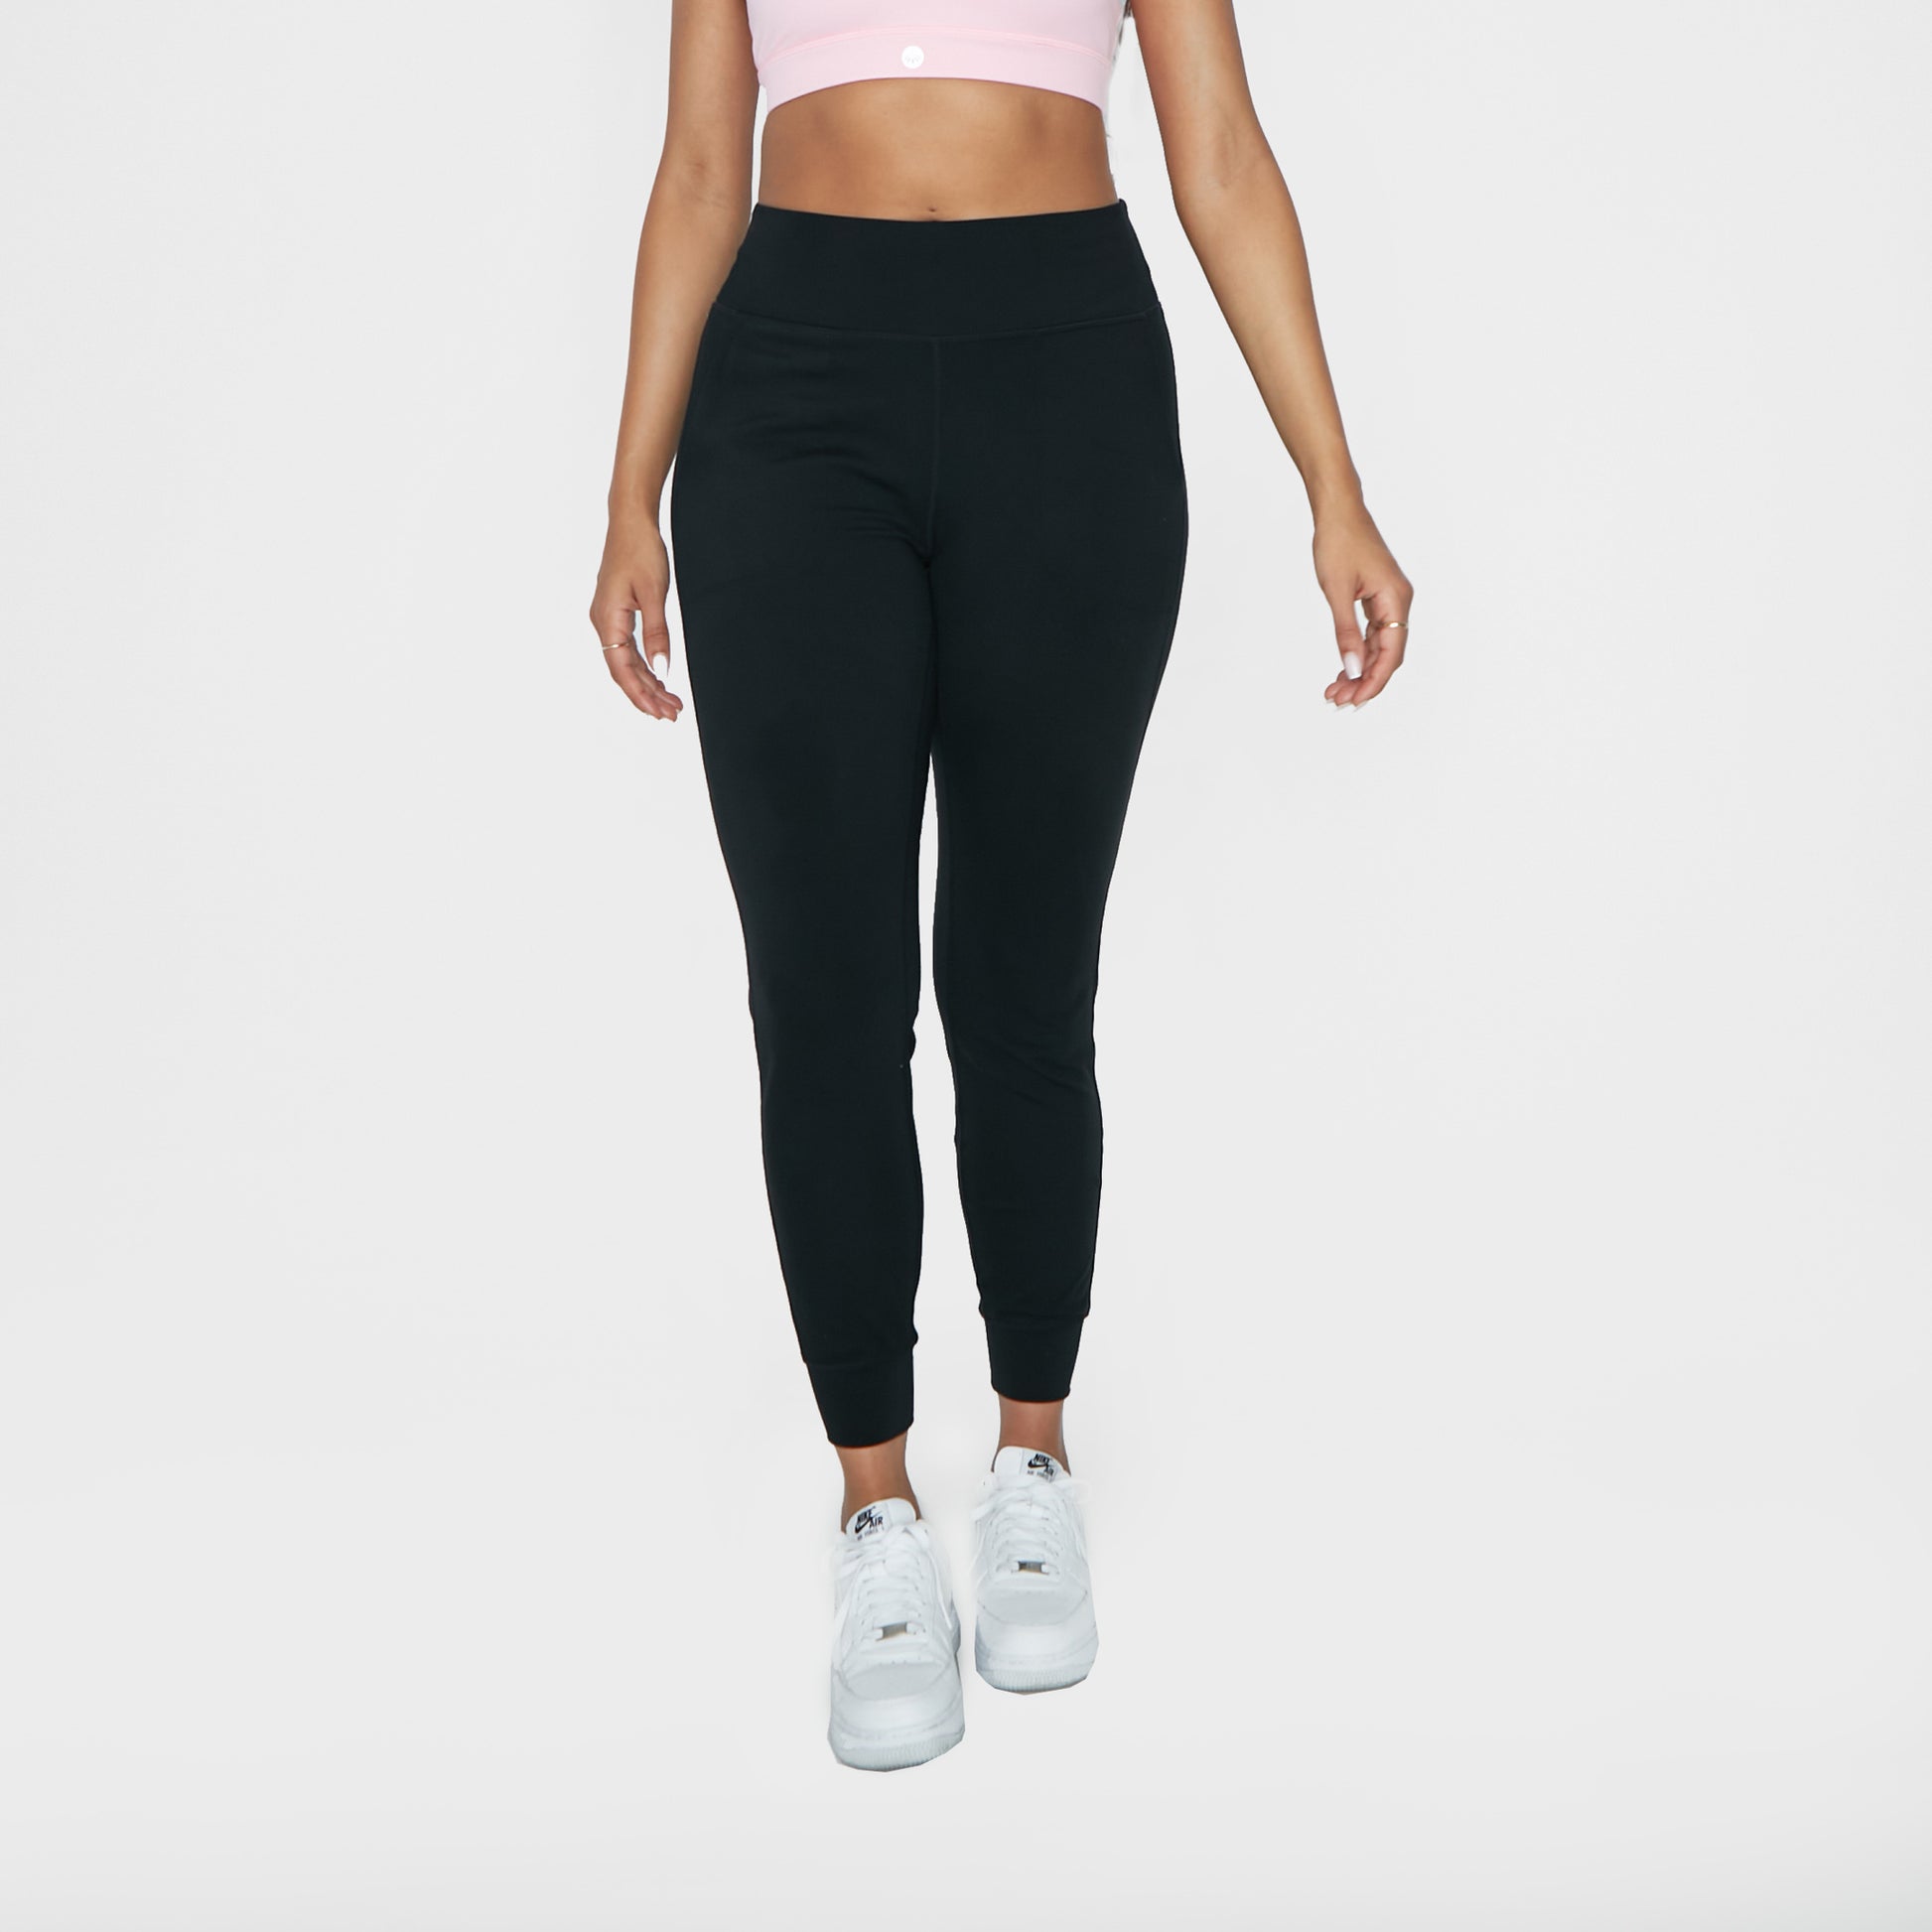 THE GYM PEOPLE Athletic Joggers for Women Sweatpants with Pockets Workout  Tapered Lounge Yoga Pants Women's Leggings (Black, X-Small) : Amazon.ca:  Clothing, Shoes & Accessories